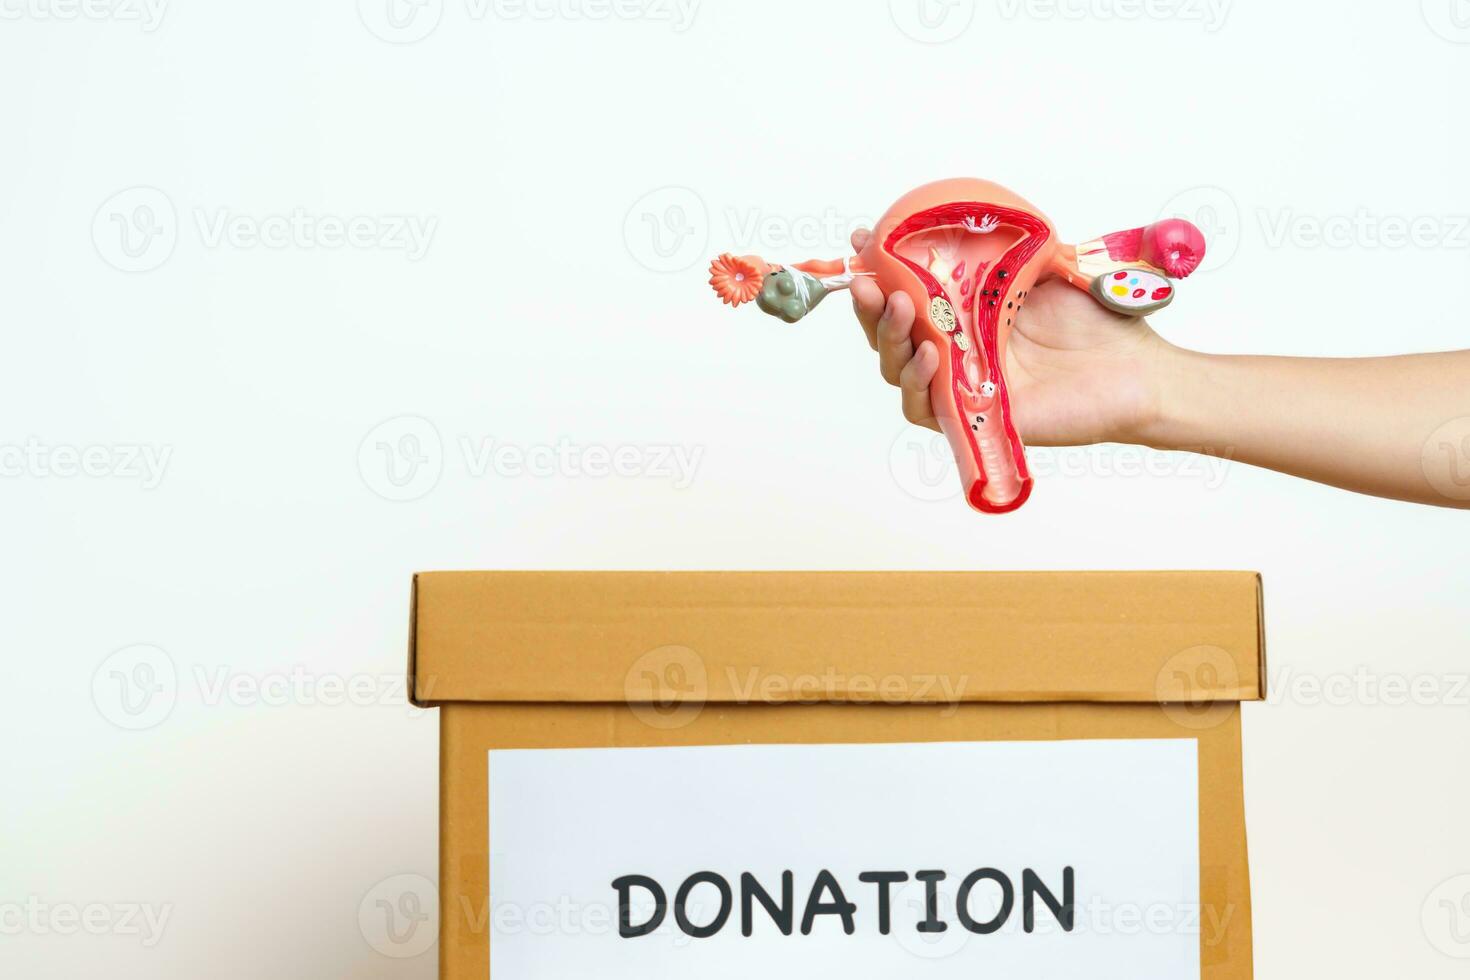 Organ Donation, Charity, Volunteer, Giving Concept. hand holding Uterus and Ovaries model into donate box for support Ovarian and Cervical cancer, Endometriosis, Uterine fibroids, Reproductive system photo